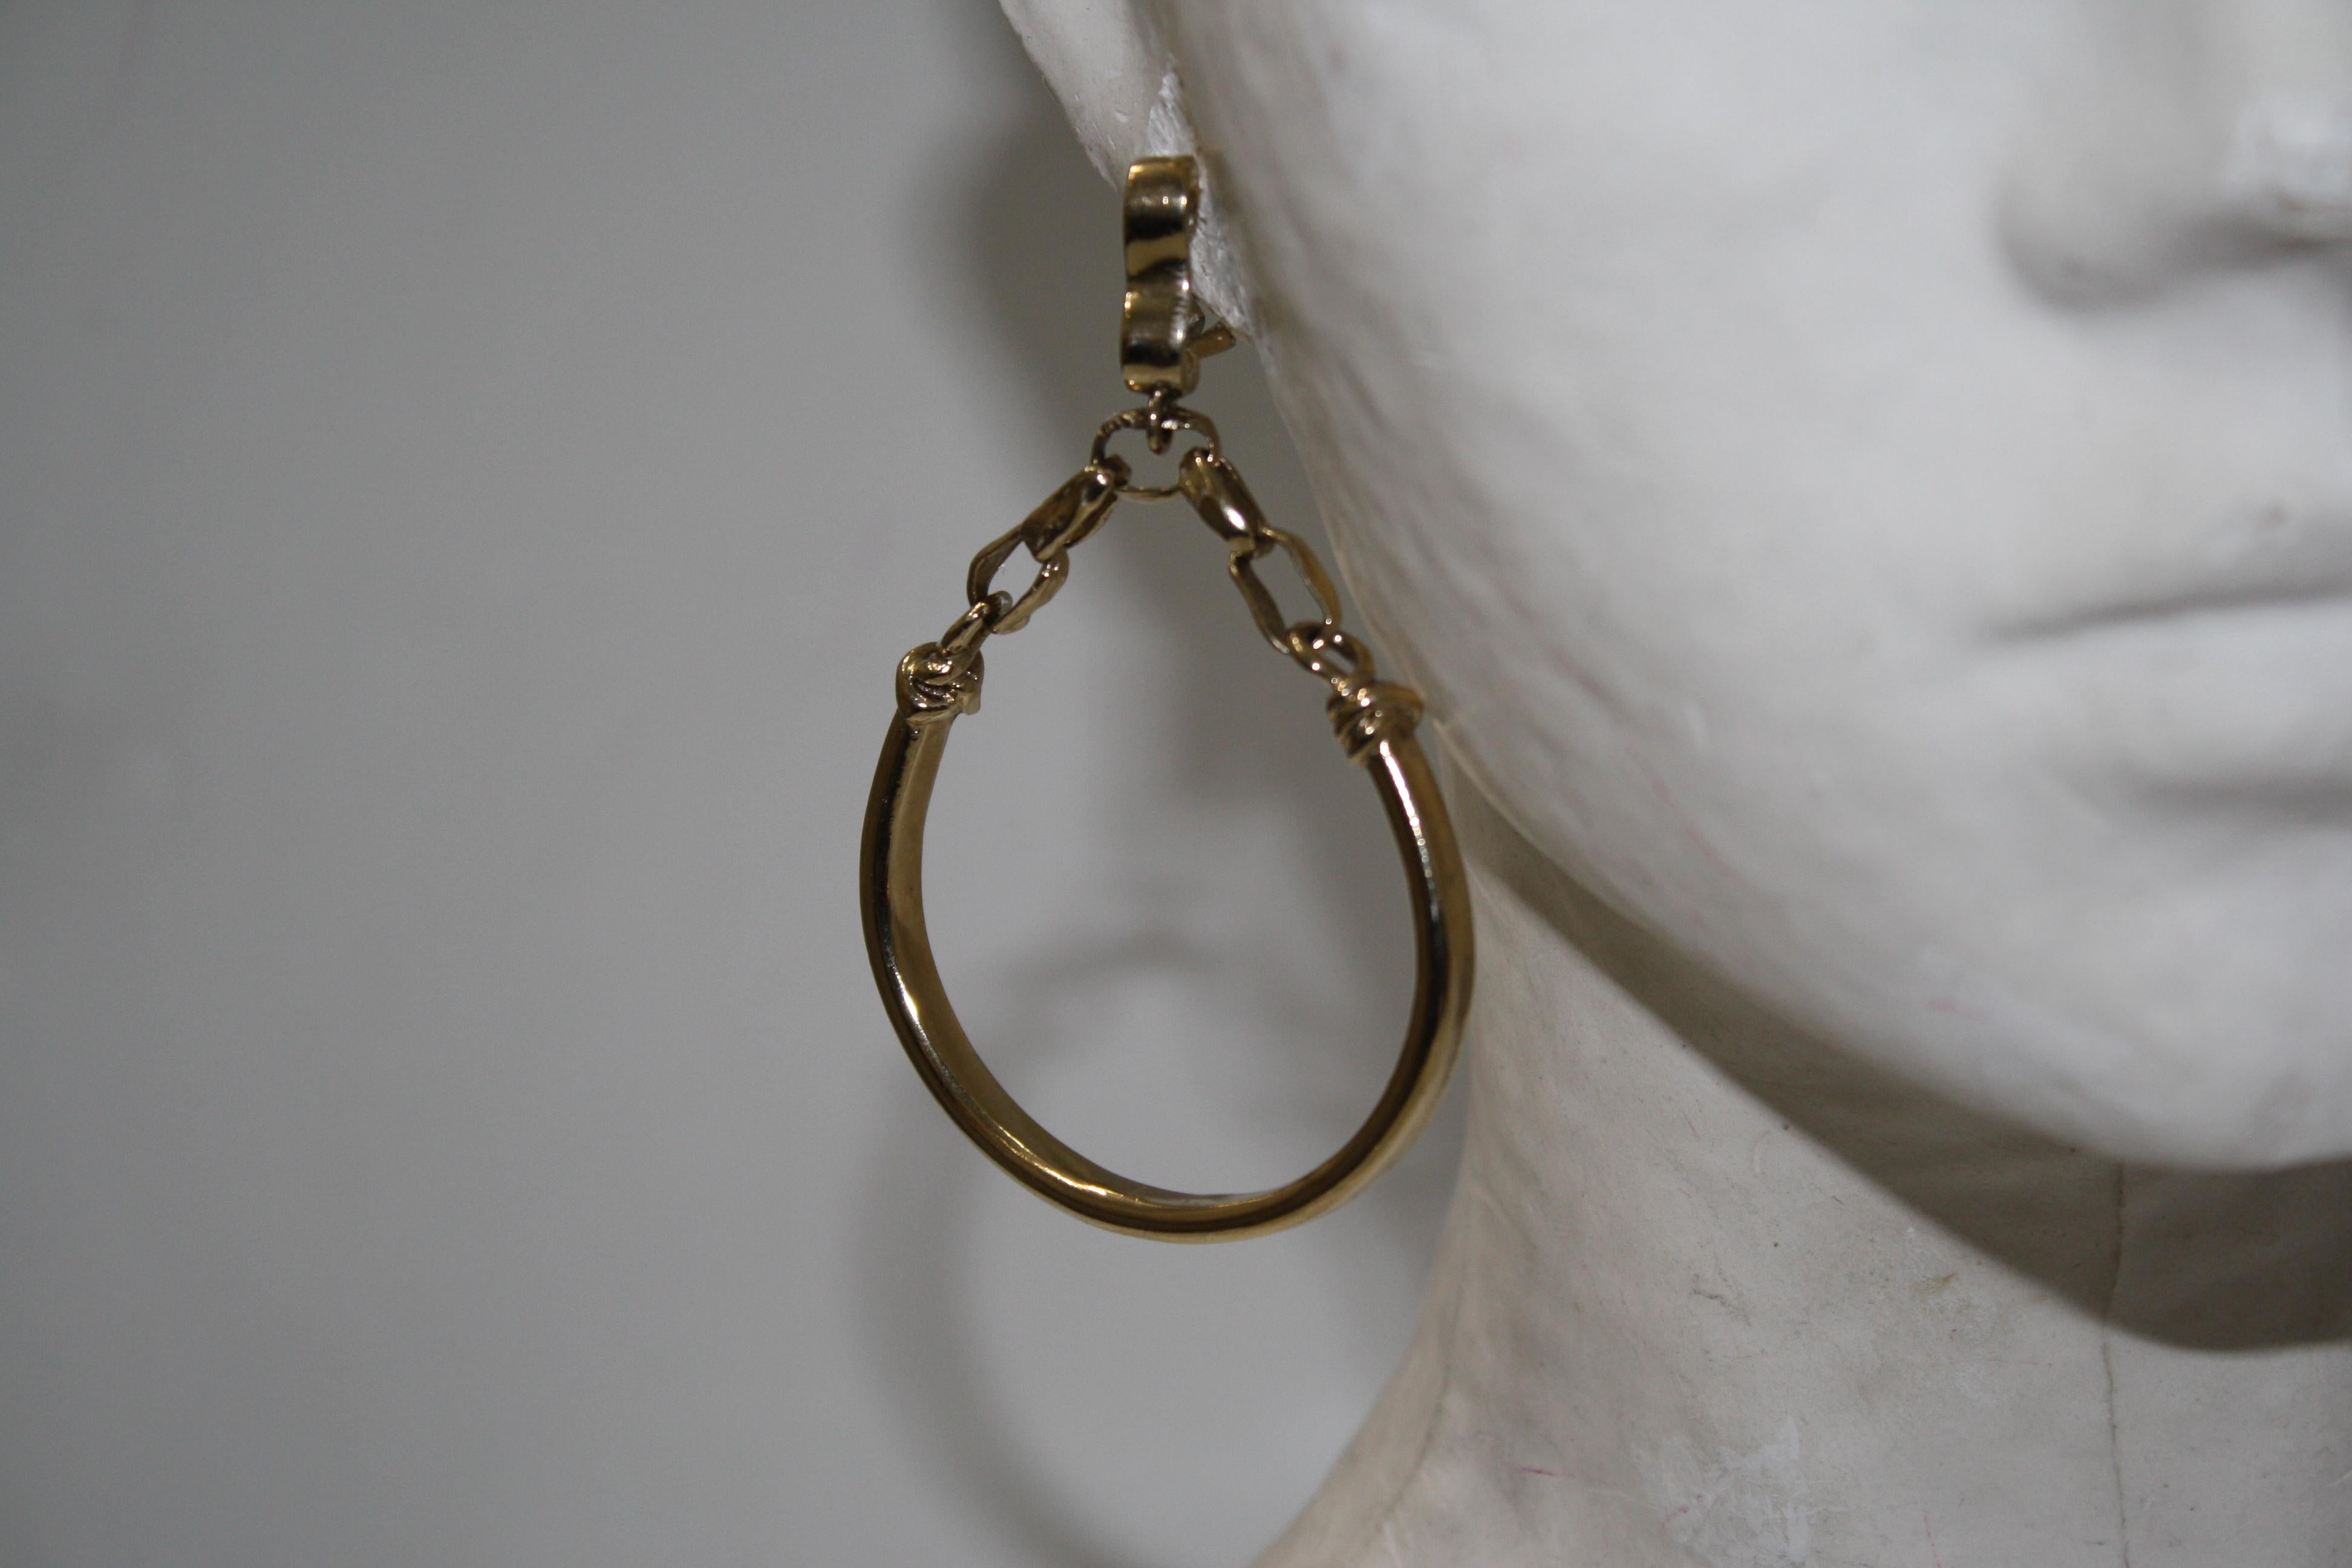 French back( studs and flap back) .Chain is holding circle hoop. Made of brass dipped in pale gold.